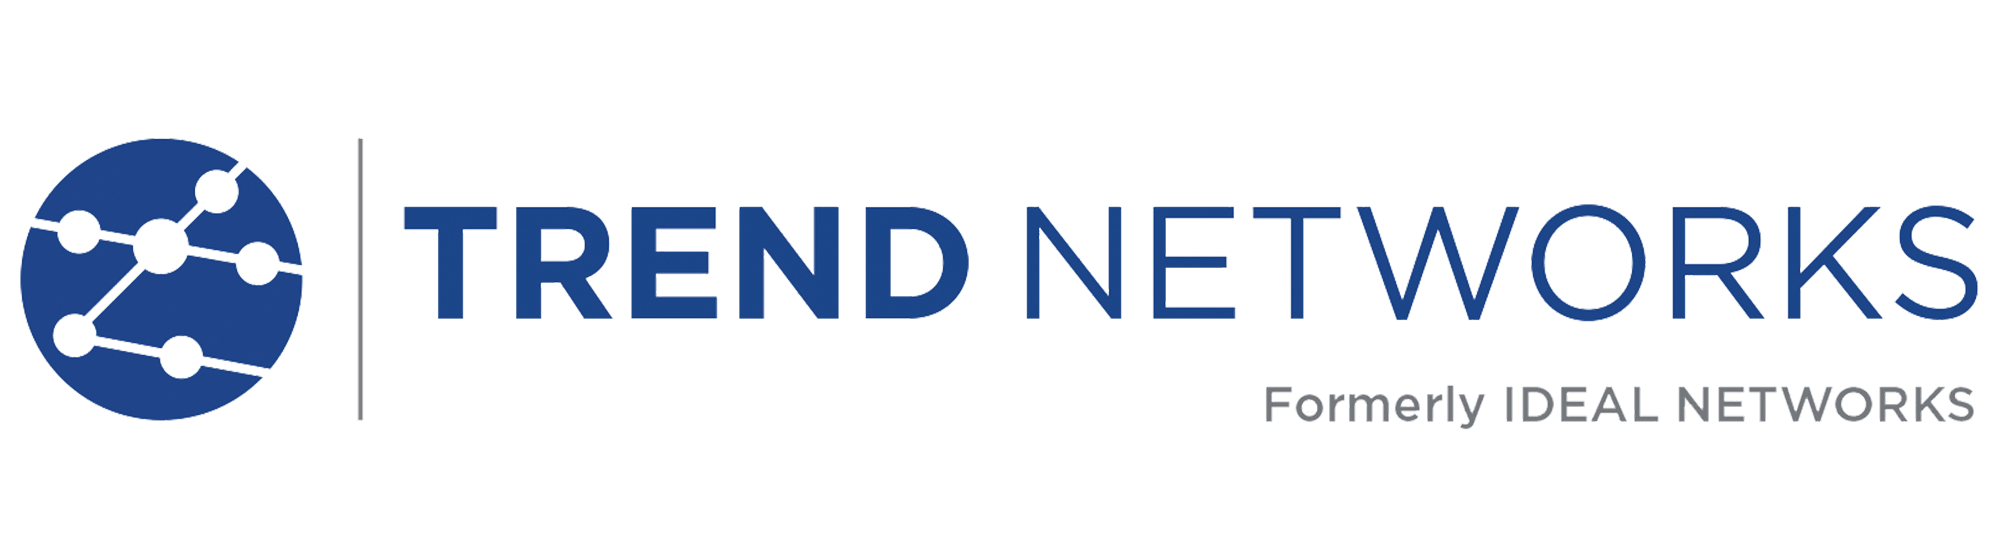 TREND Networks formerly IDEAL Networks logo